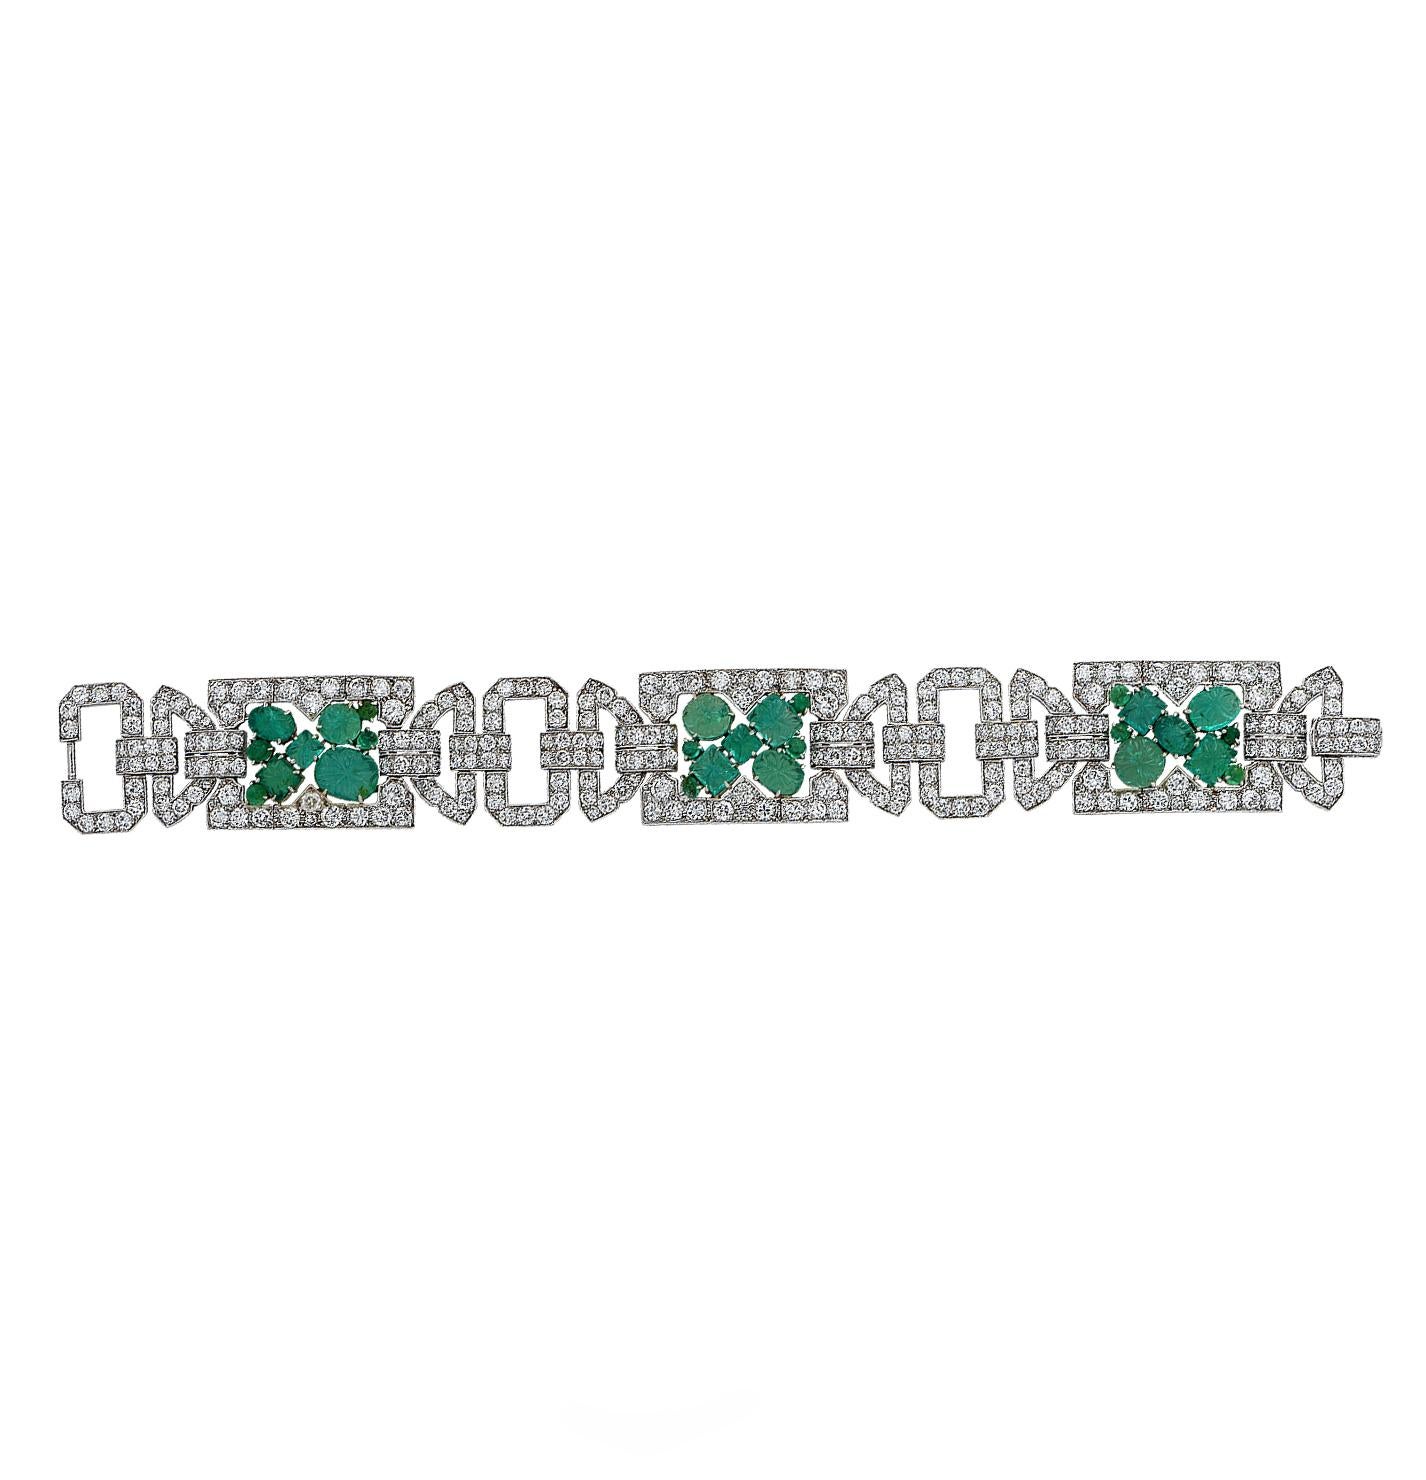 Striking Art Deco Circa 1920s bracelet crafted in platinum showcasing 27 cabochon carved emeralds framed, with 294 European cut diamonds weighing approximately 25 carats total, h color, vs clarity. This stunning piece measures 7.25 inches in length